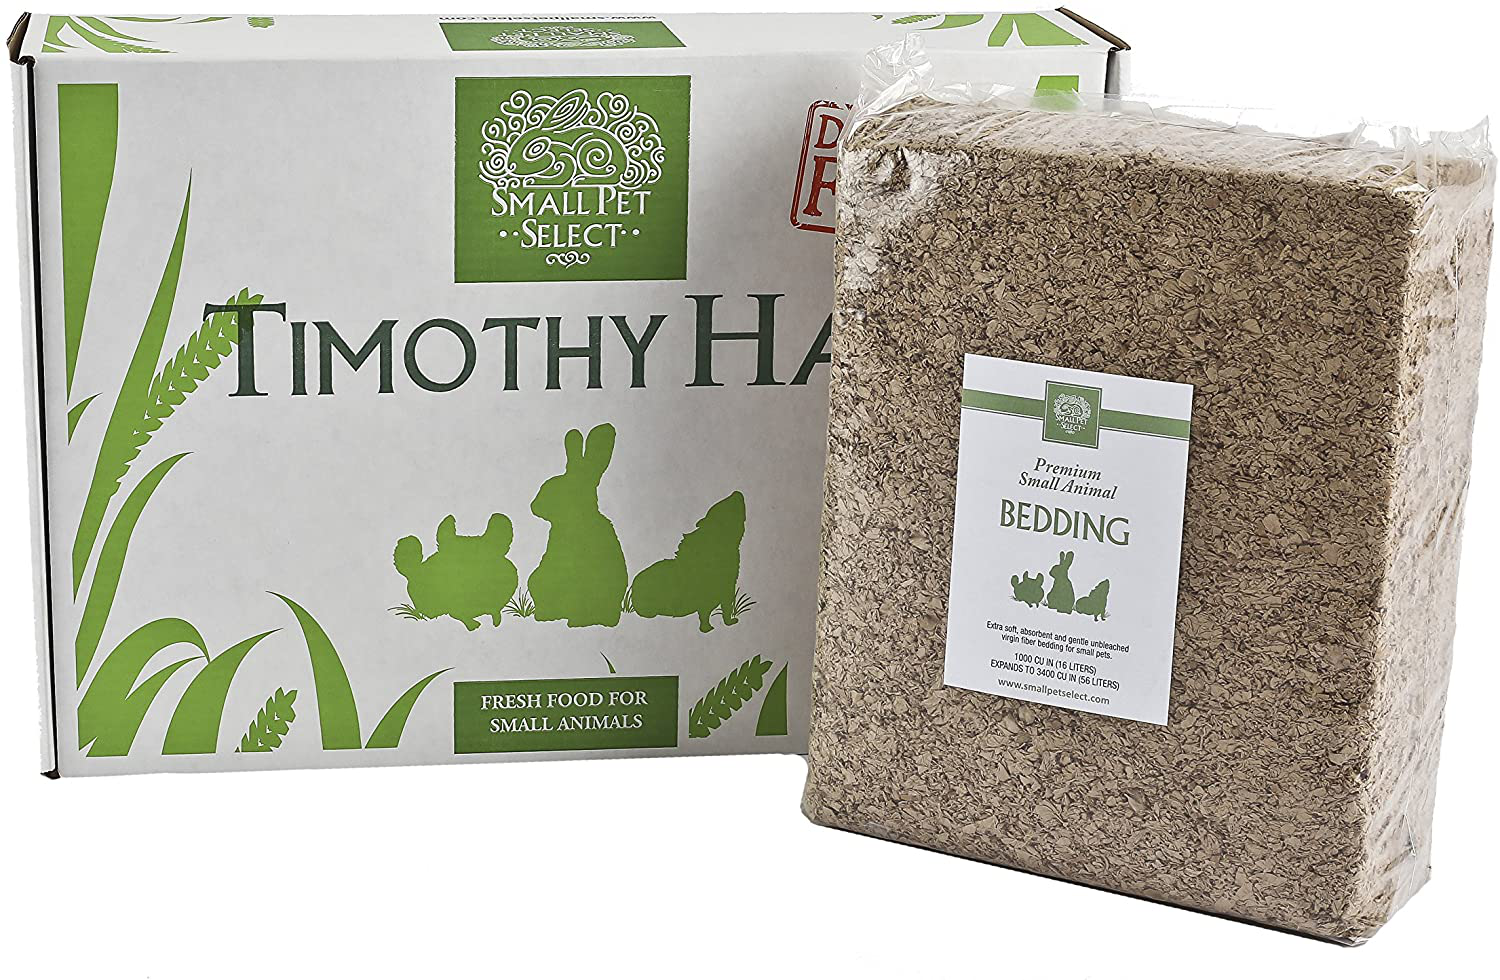 Small Pet Select Timothy Hay and Bedding Combo Pack